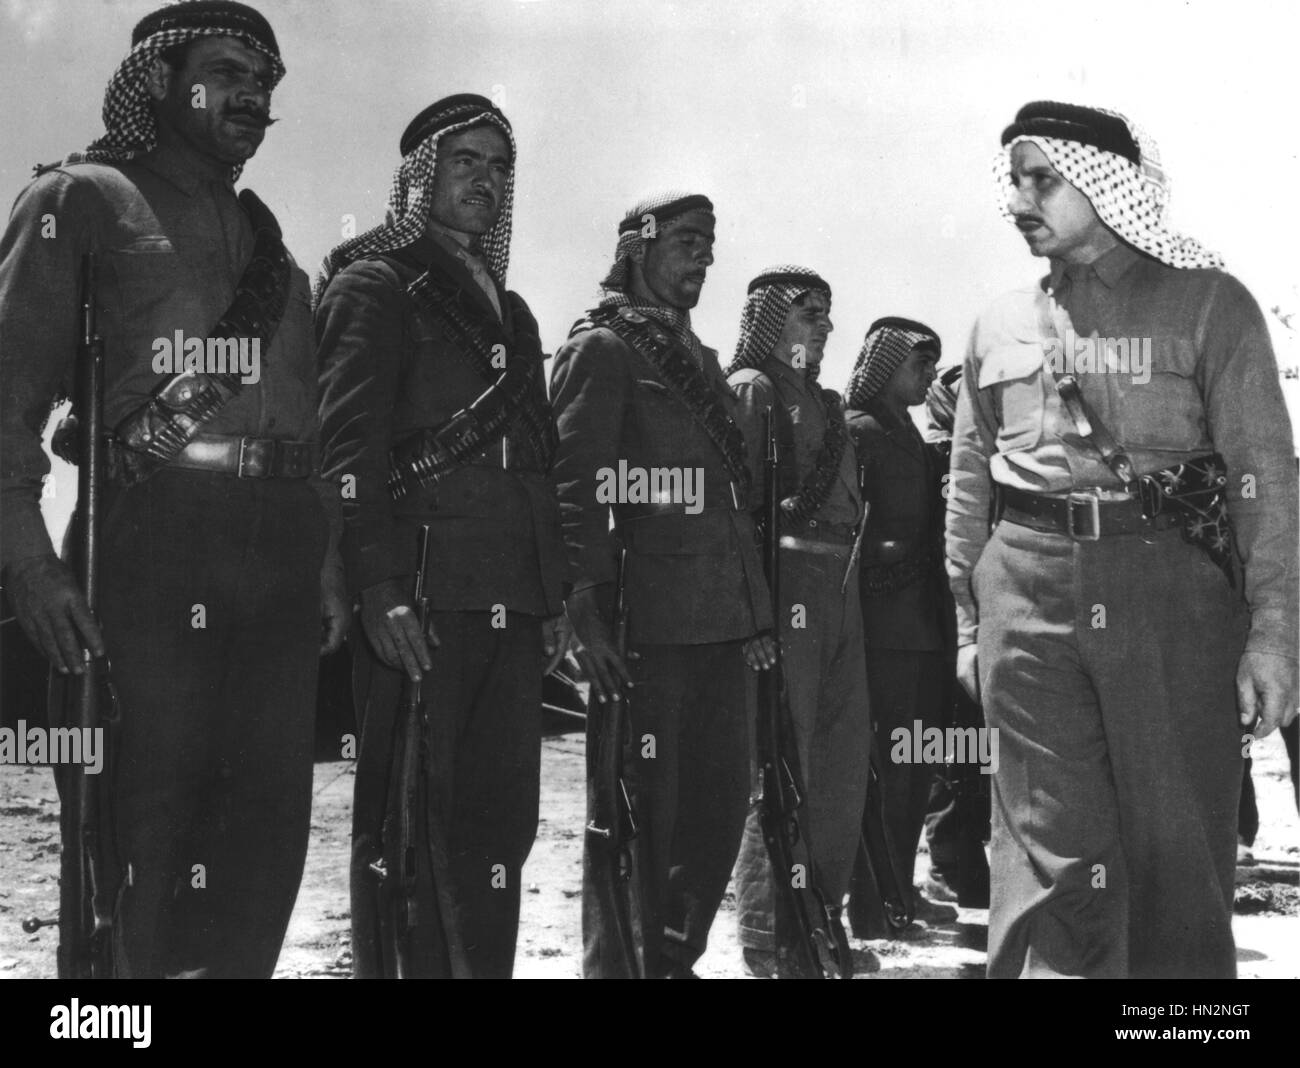 Arab Liberation Army: Fawzi Bey el Kawuki (leader of the Arab liberation movements) inspects the Iranian and Syrian troops (North East of Palestine) that fight against the Jews April 17, 1948 Palestine, Israel Washington, National archives Stock Photo